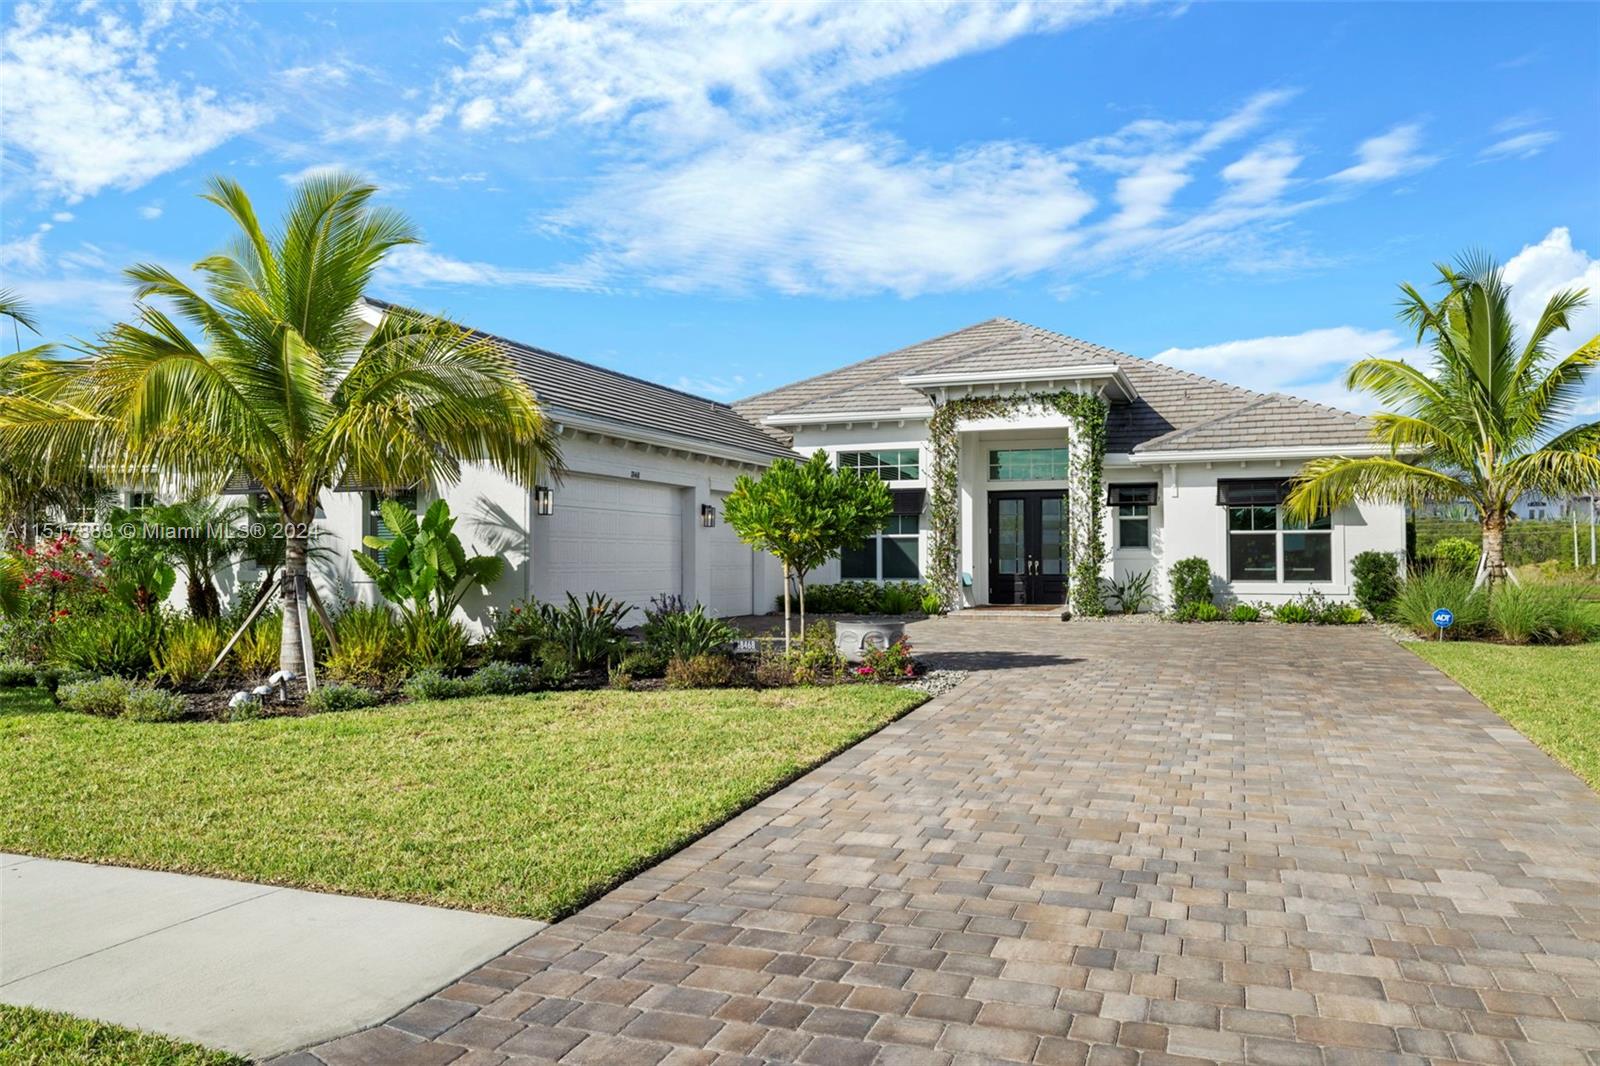 Property for Sale at 18468 Wildblue Blvd Blvd, Fort Myers, Lee County, Florida - Bedrooms: 4 
Bathrooms: 4  - $1,620,999